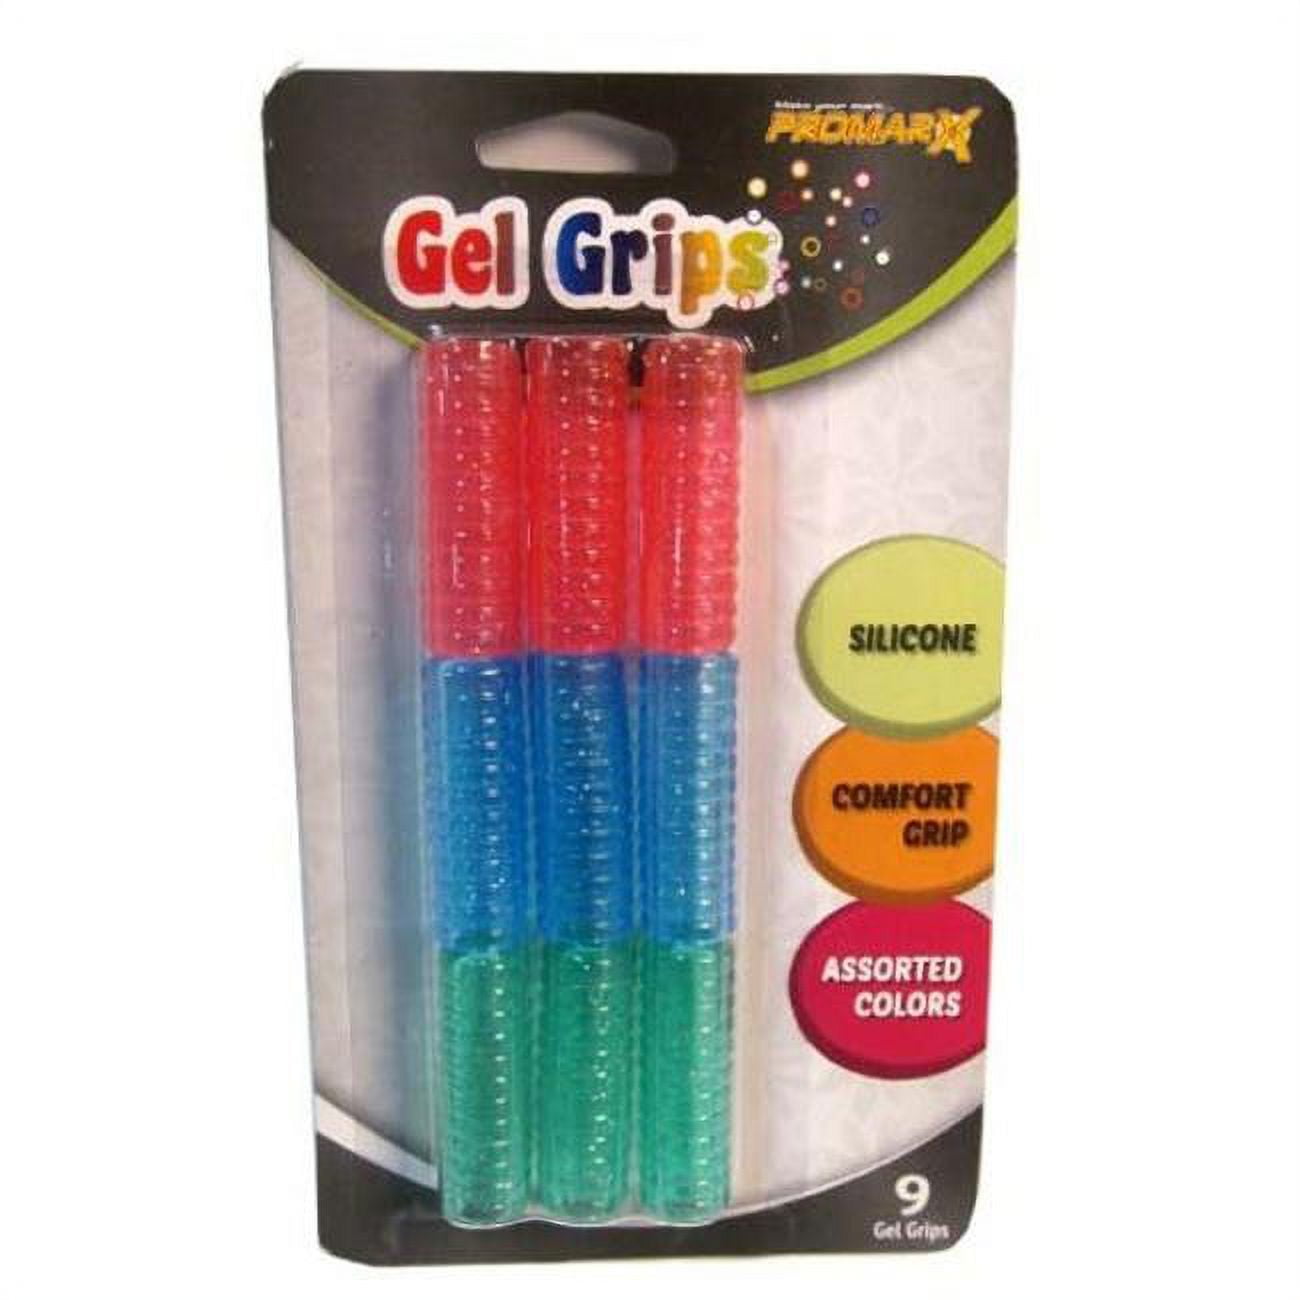 2329666 Silicone Gel Grips, Assorted Color - 9 Count - Case Of 48